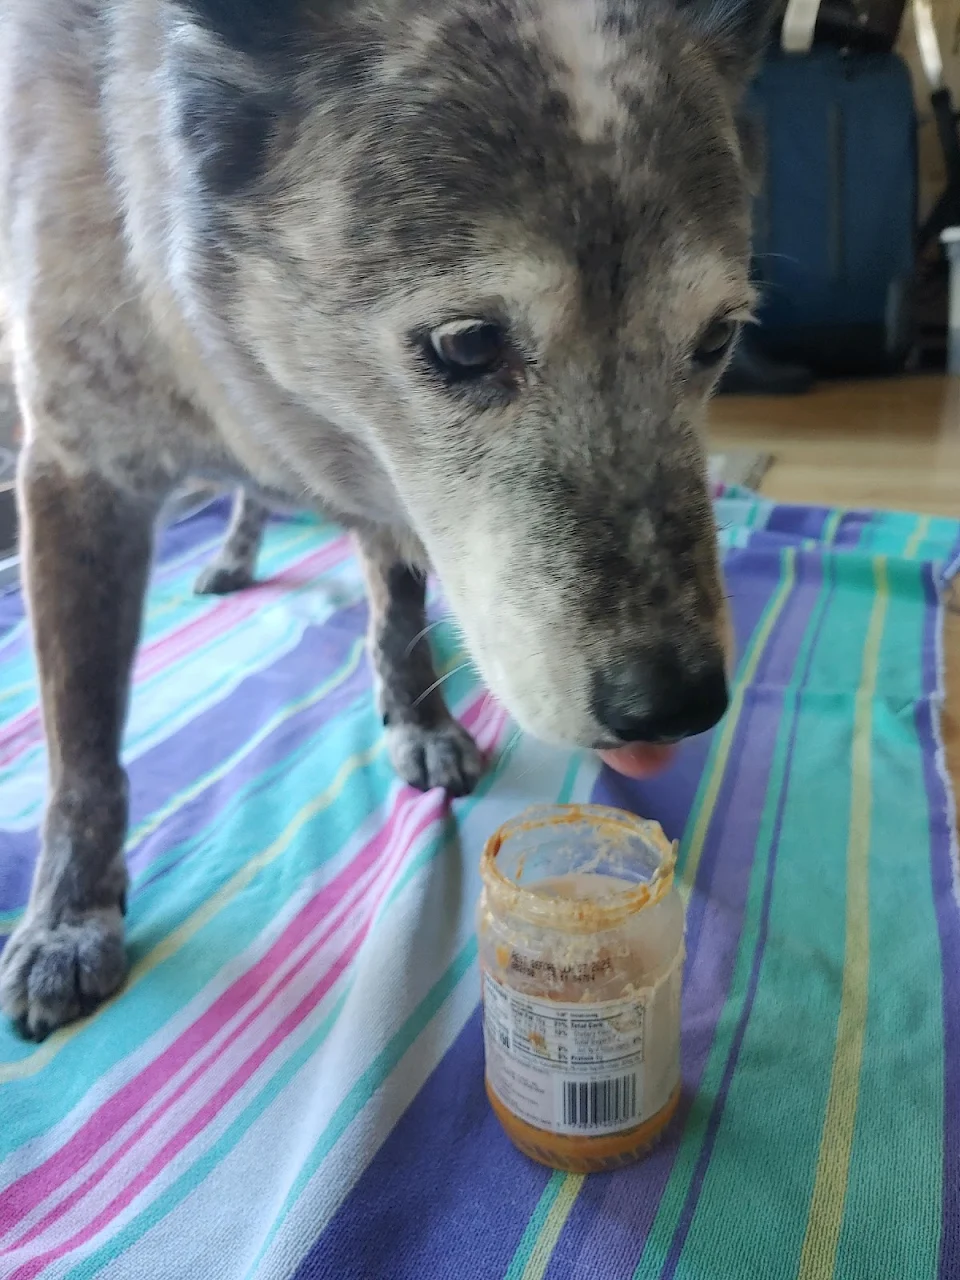 Just an old dog and her pb